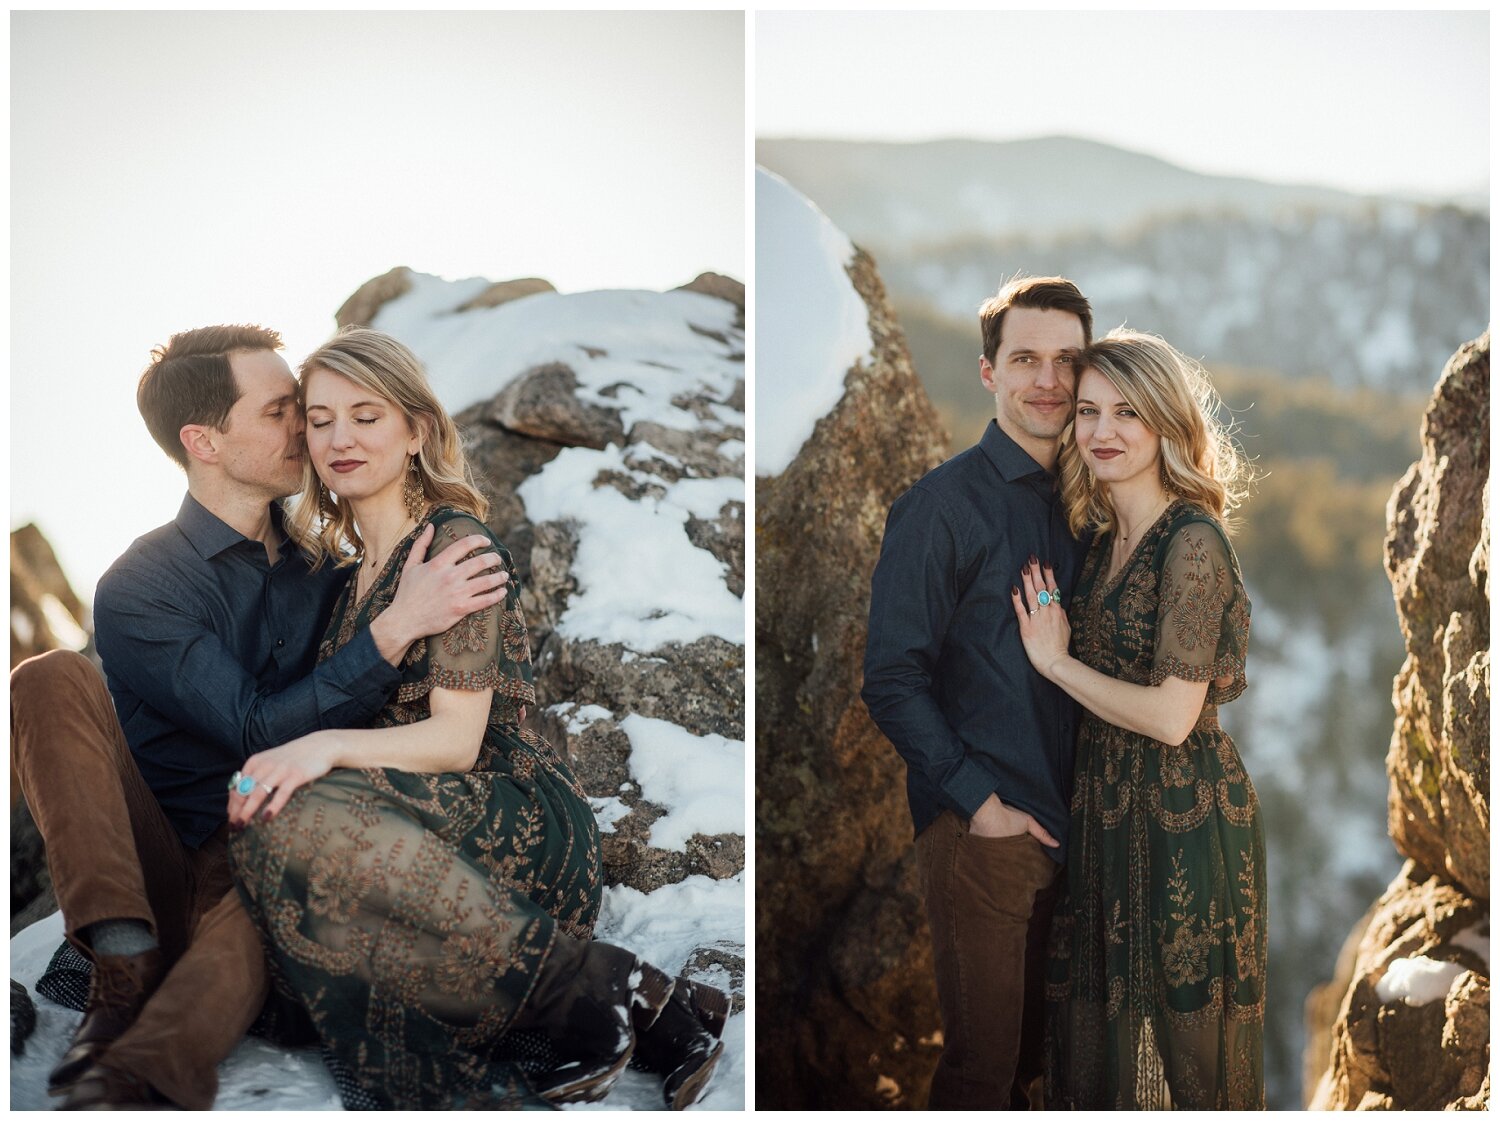  Lost Gulch Outlook Engagement Session, Colorado engagement photographer, Boulder Colorado Engagement, Mountain Engagement in Colorado, Winter Colorado Engagement, Colorado Engagement ideas, Colorado engagement inspiration, Colorado, mountain engagem